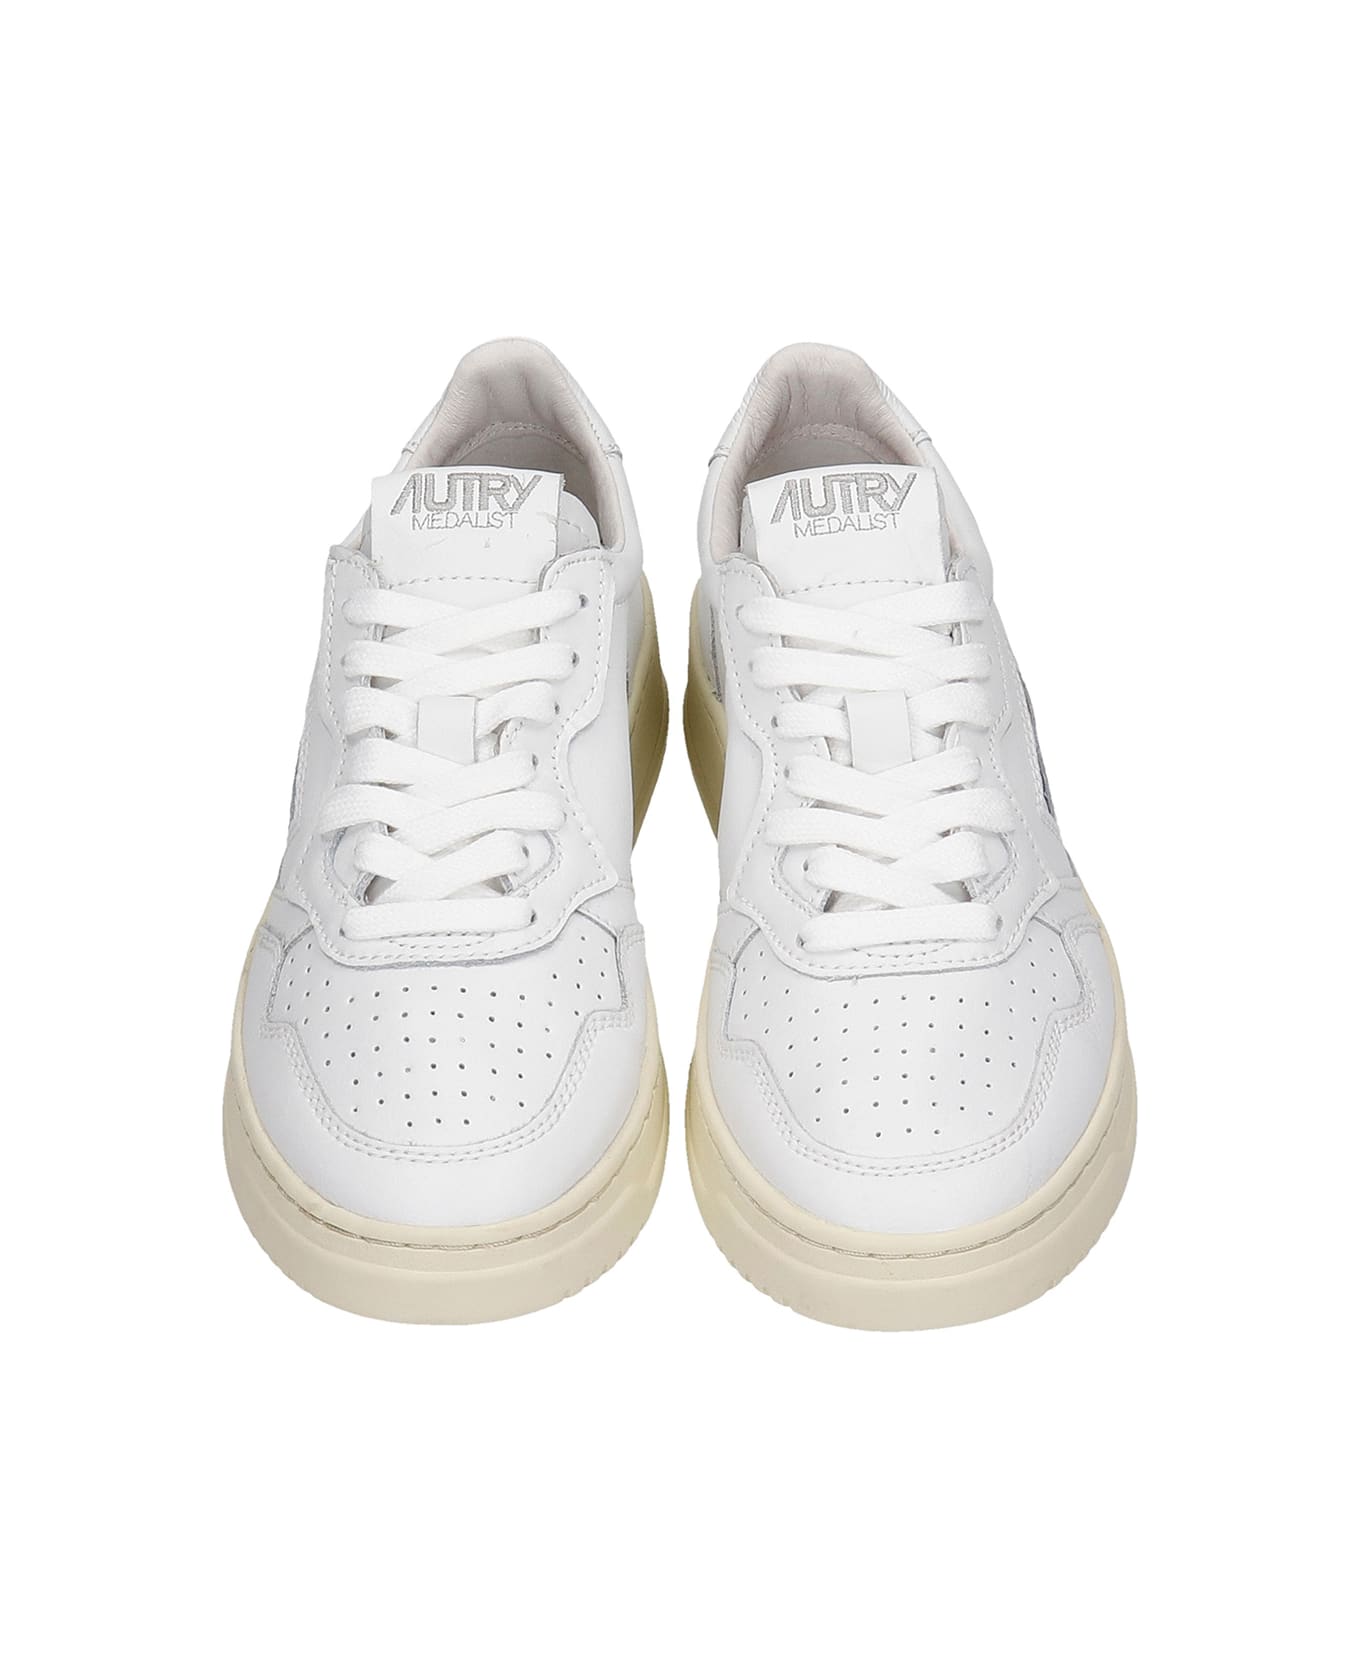 Autry 01 Sneakers In White Leather - WHITE スニーカー